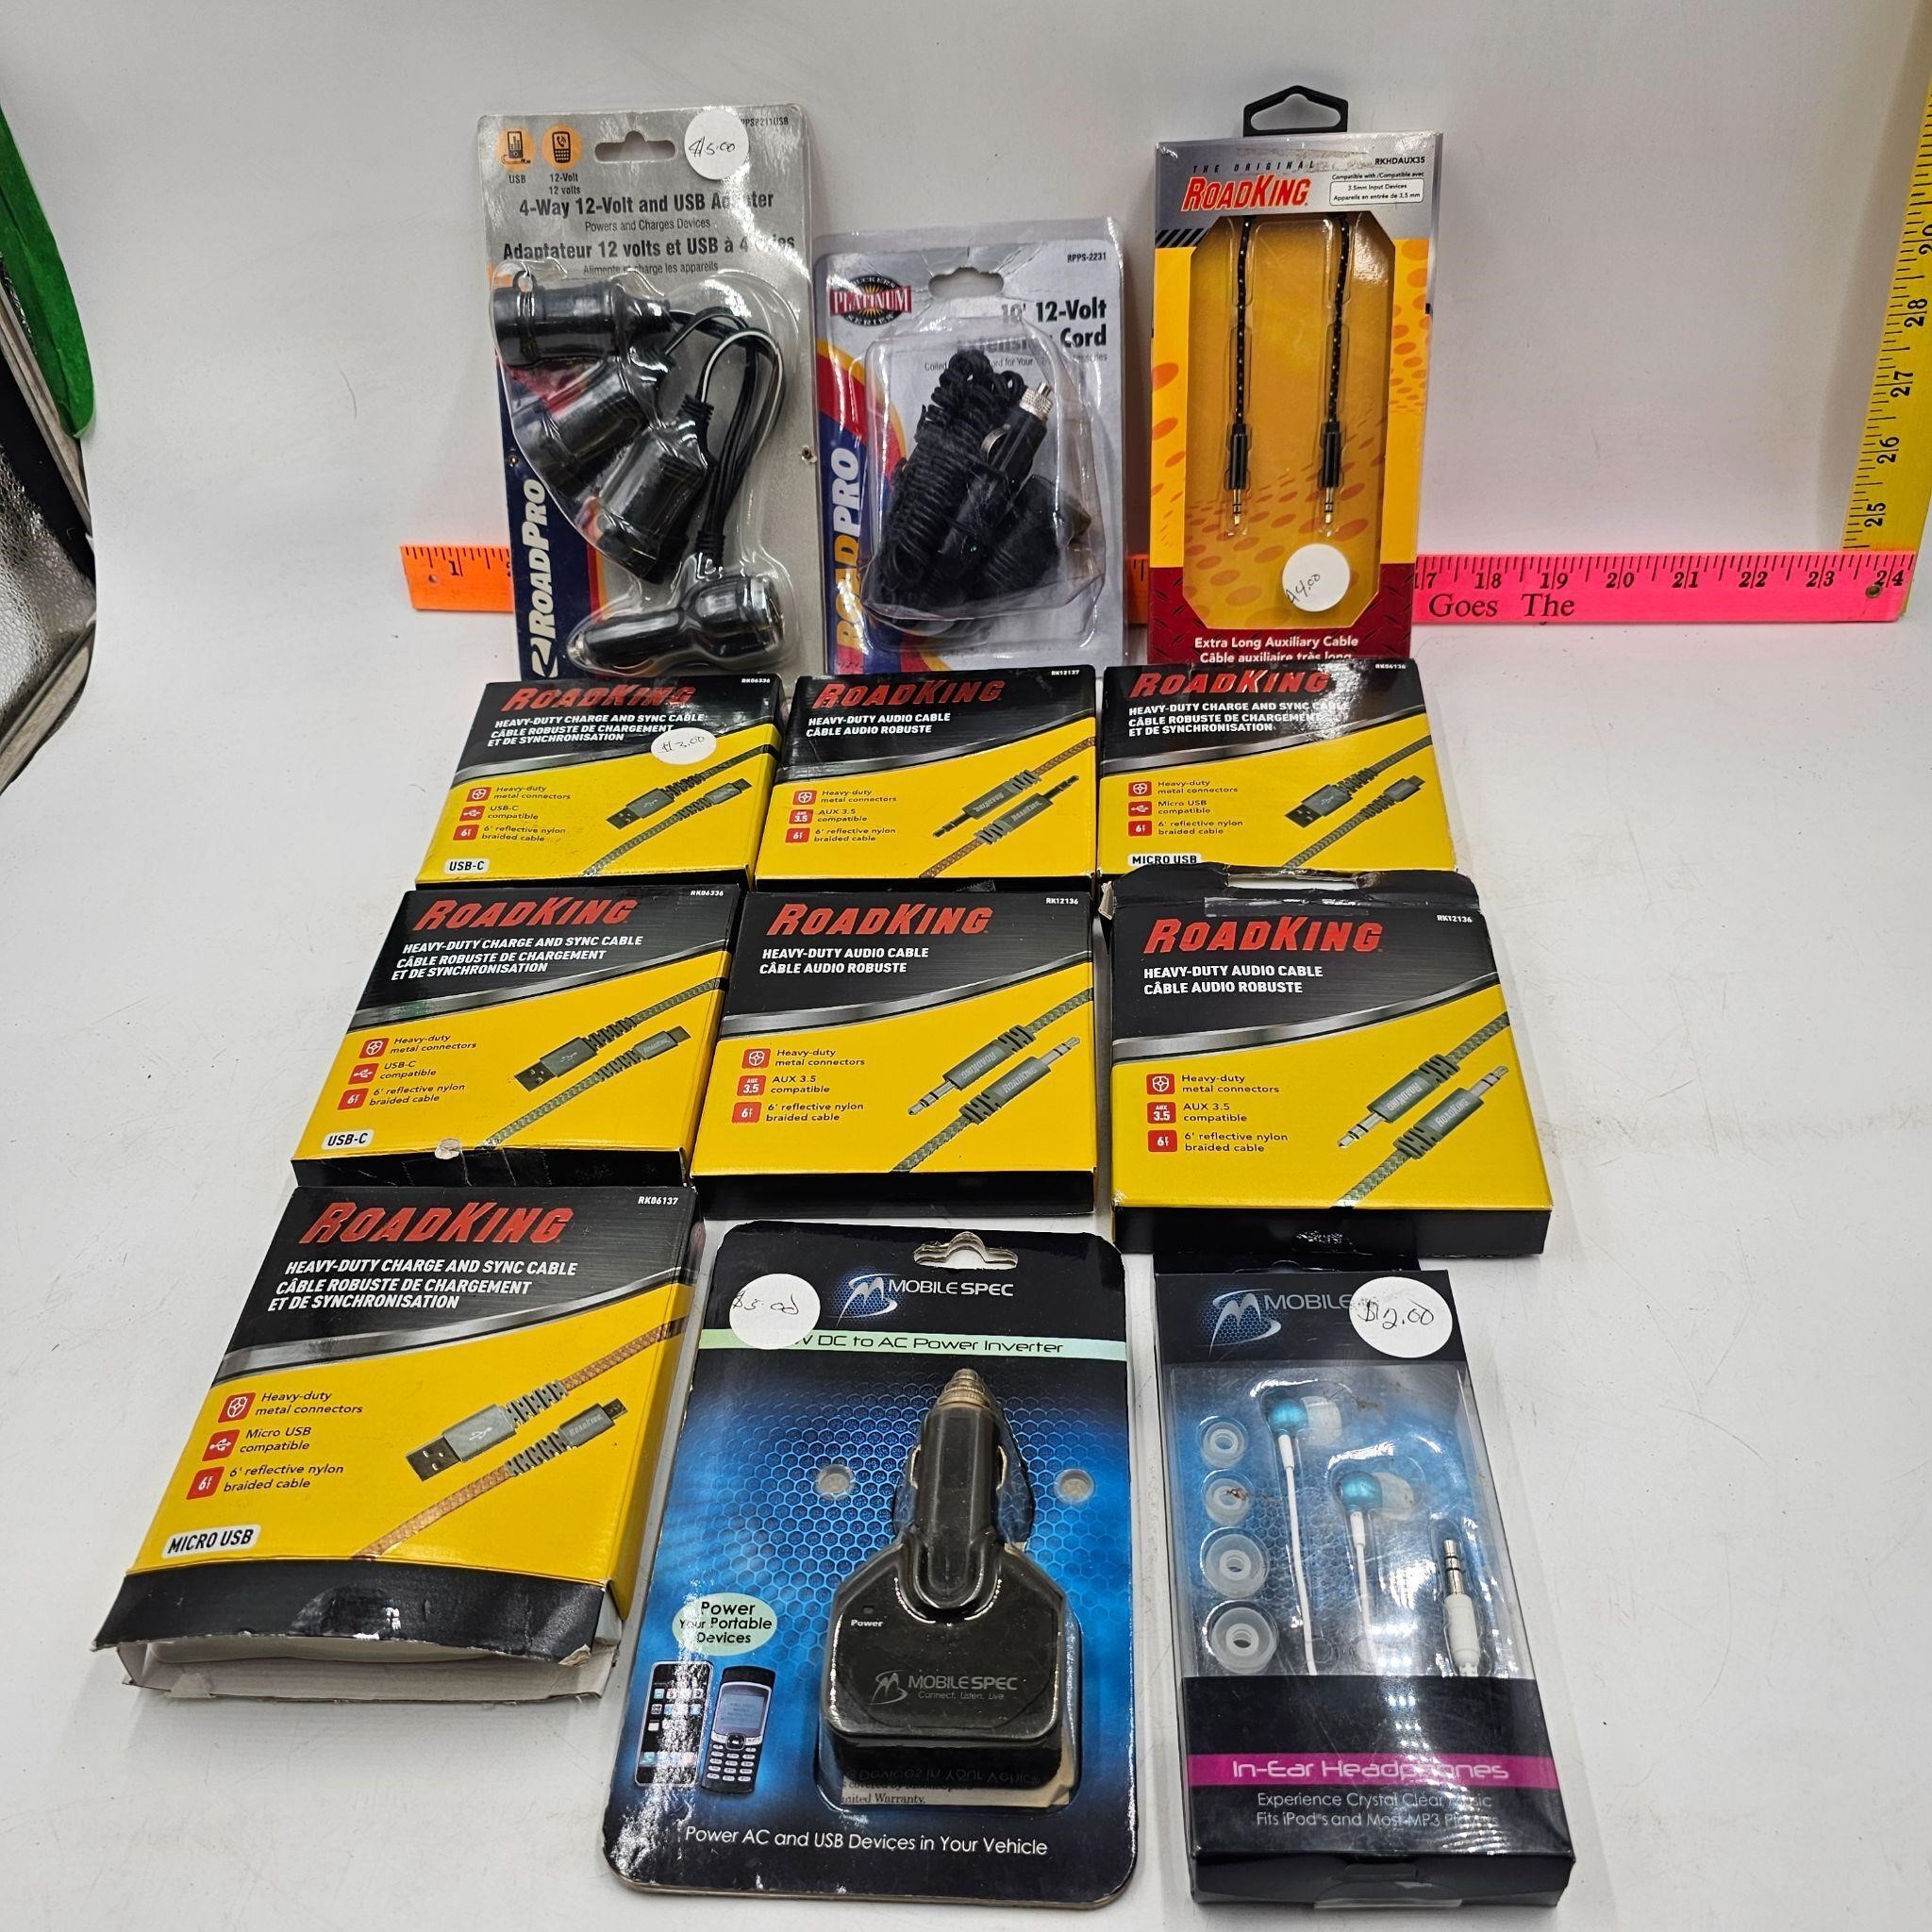 Road King Phone Chargers and more